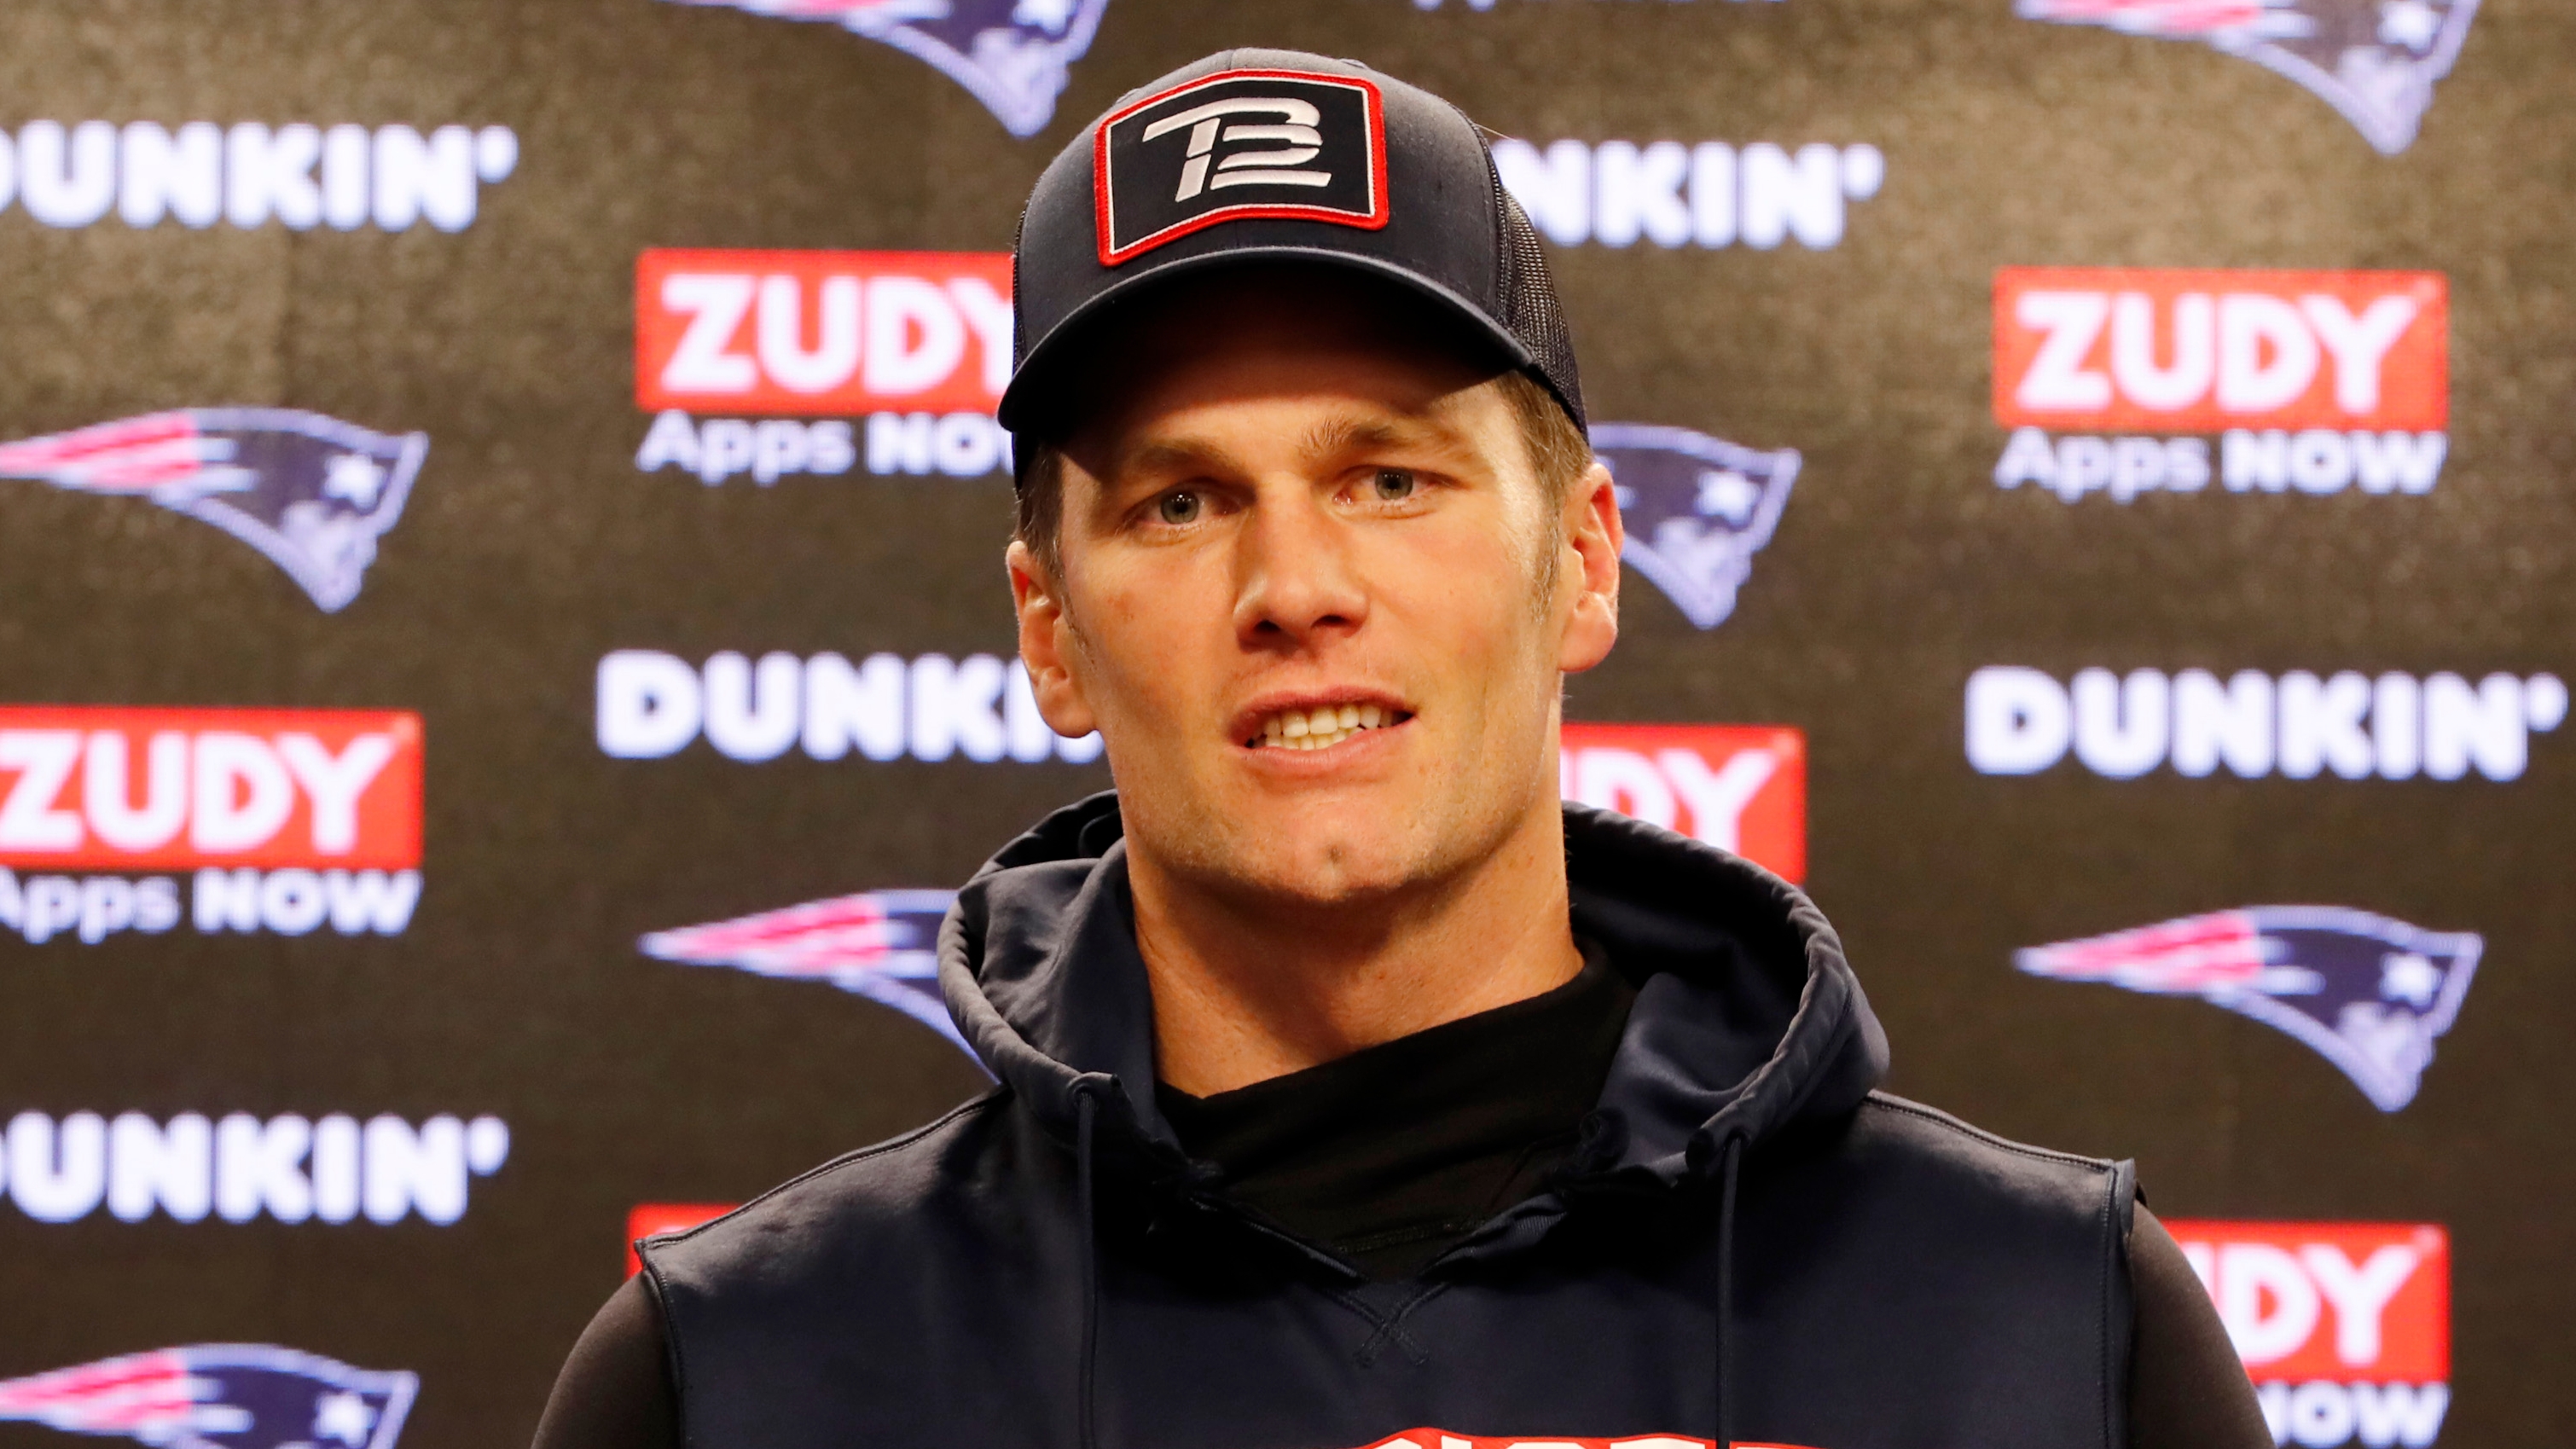 Tom Brady's personal brand approved for PPP loan